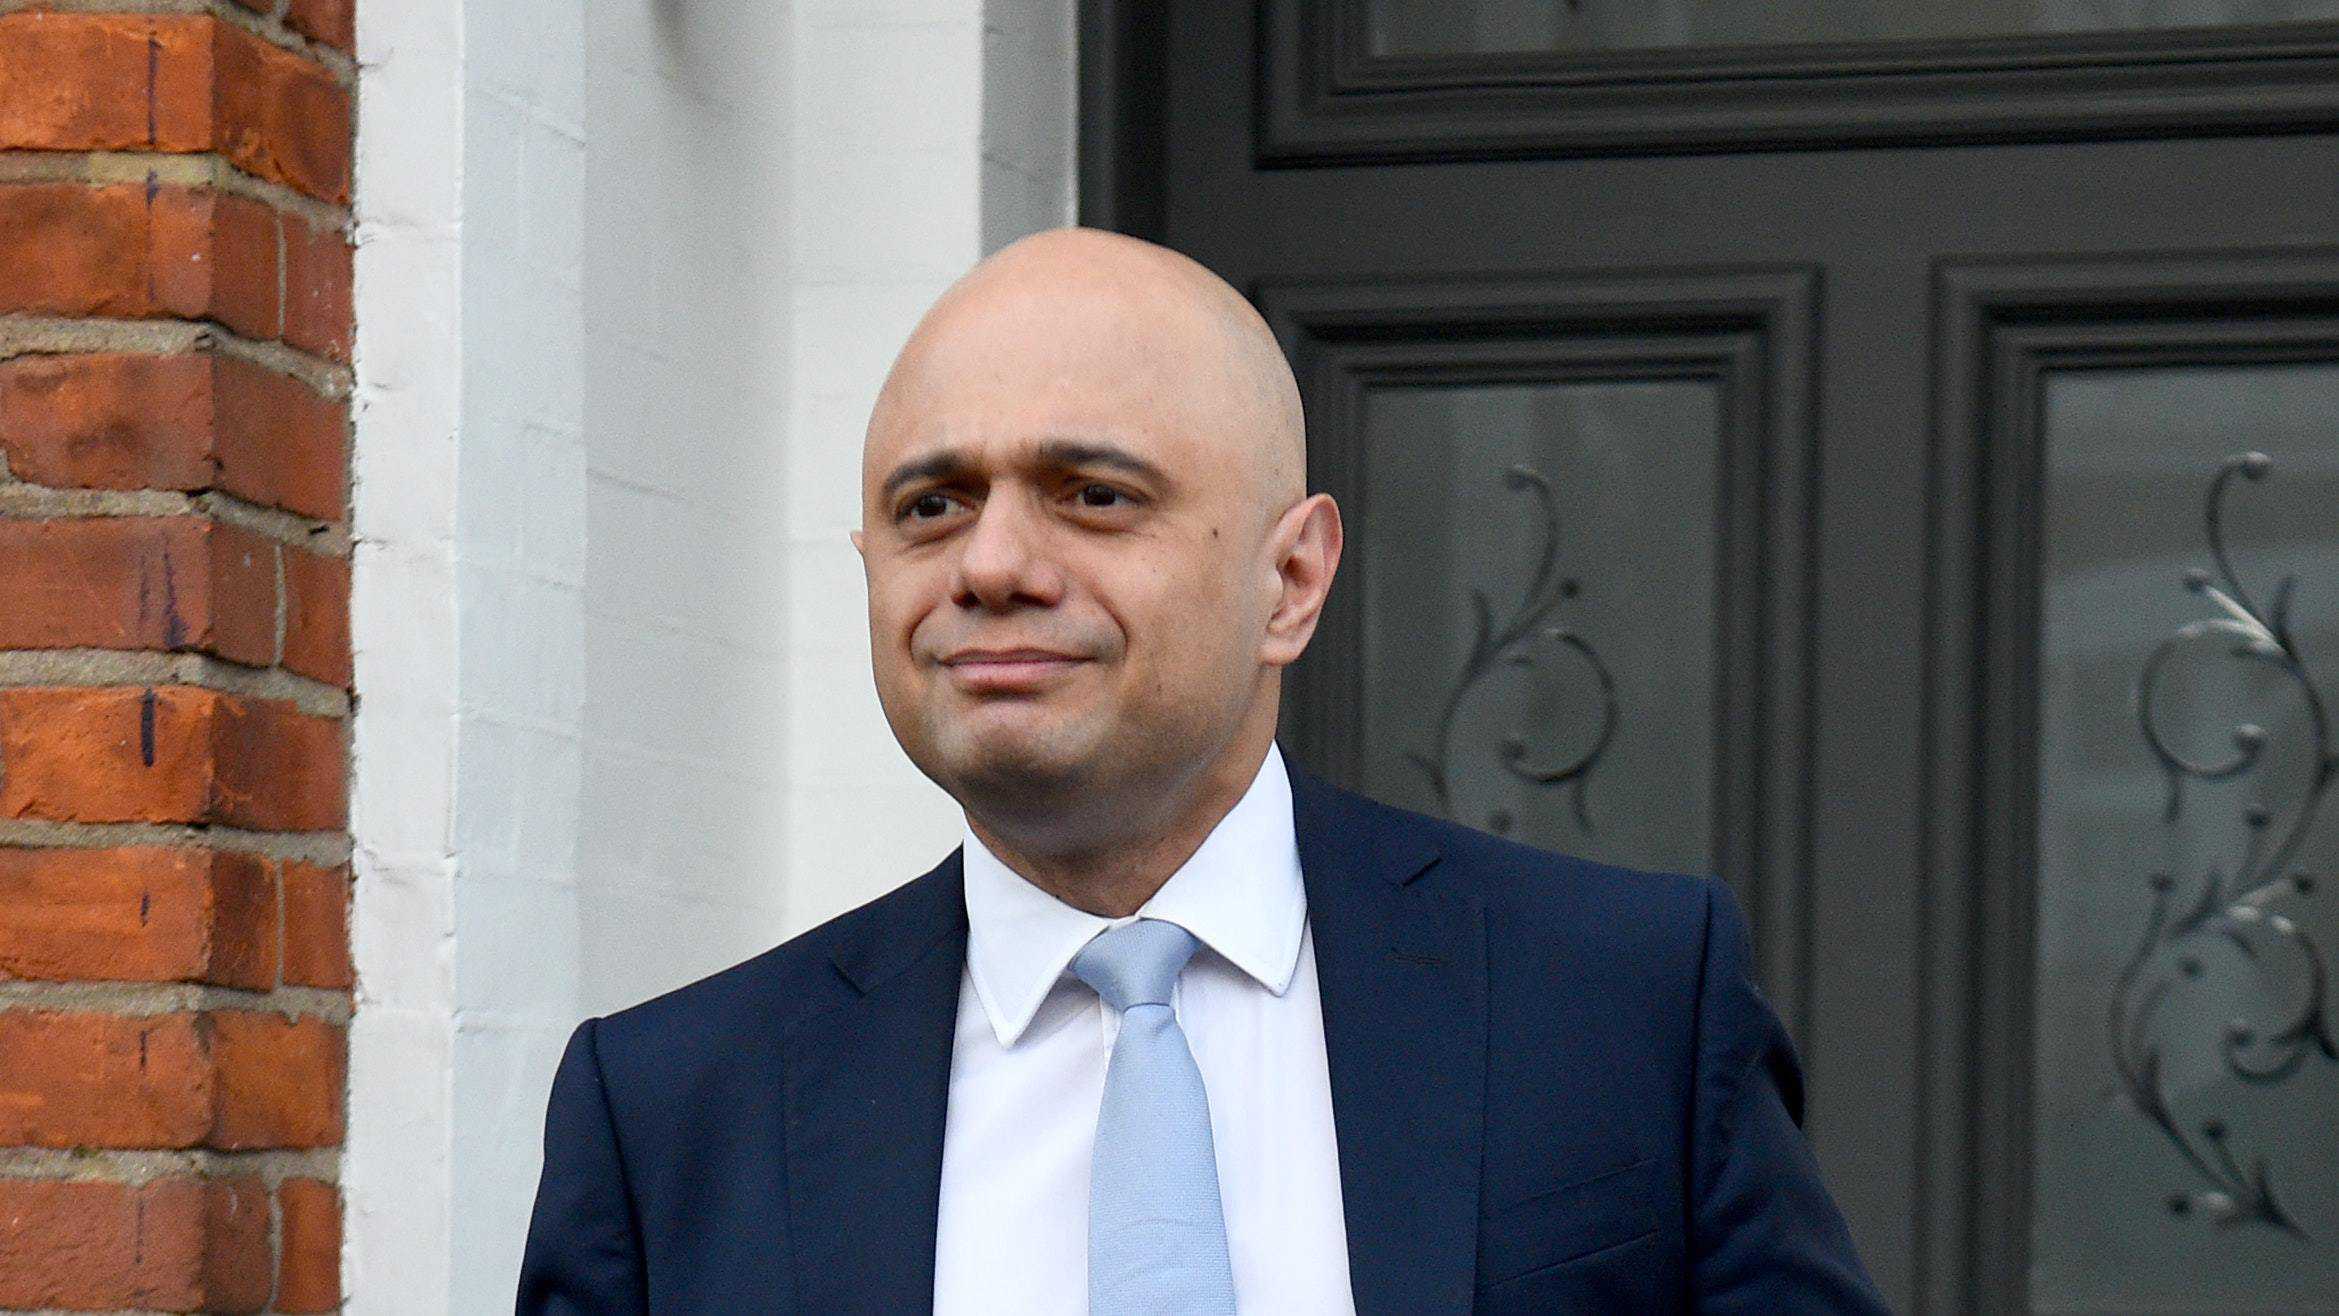 Health Secretary Sajid Javid tests positive for Covid-19 as Freedom Day looms